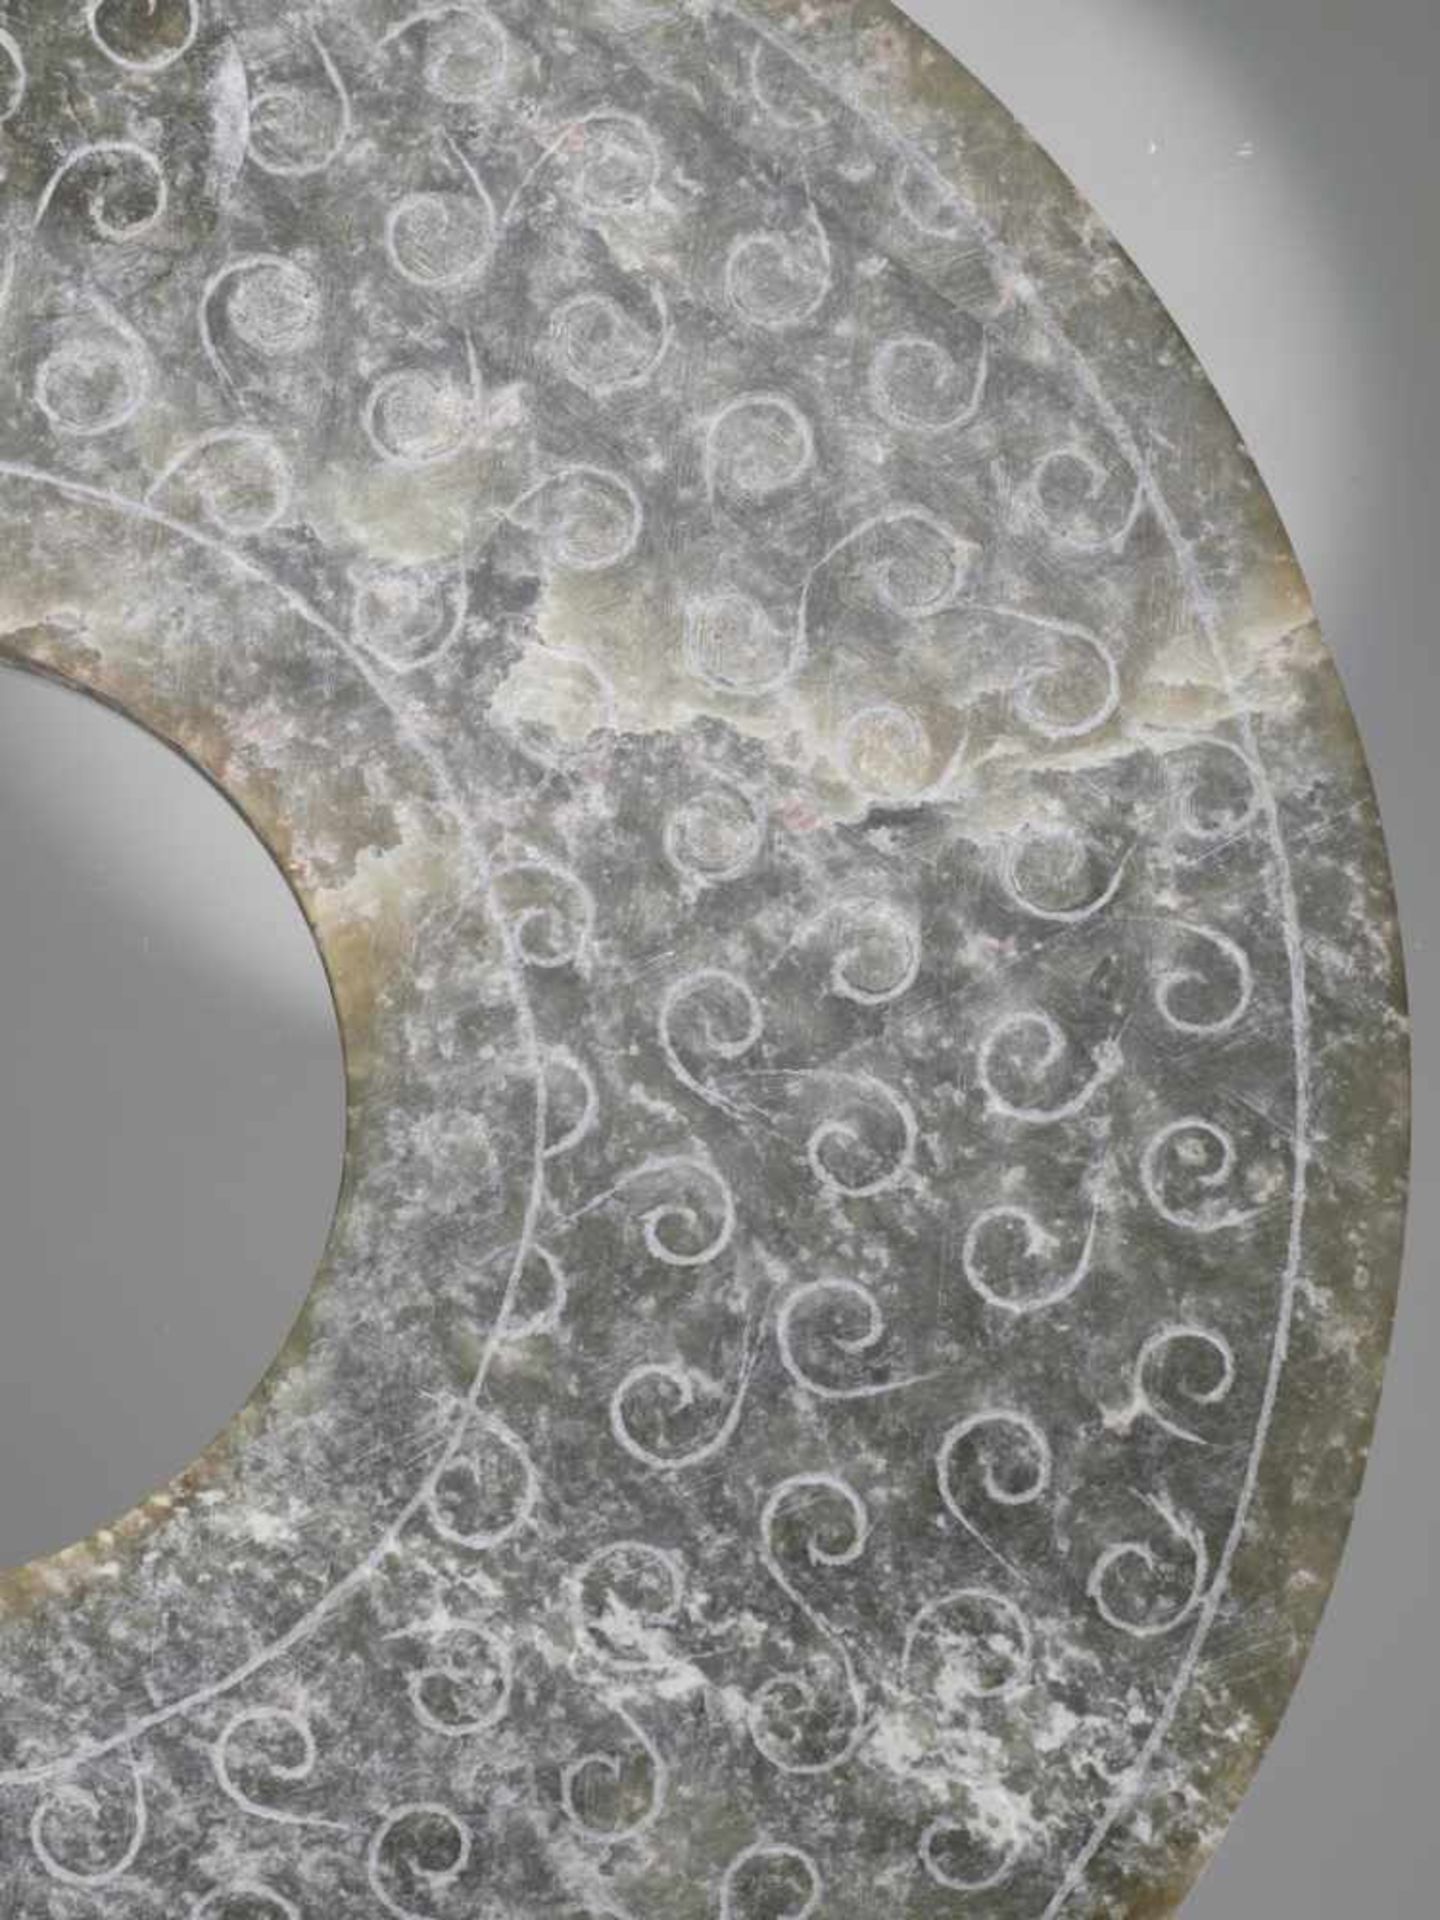 A REFINED CHARCOAL GREY DISC WITH ENGRAVED CURLS Jade. China, Han Dynasty, 2nd century BC 穀紋玉璧 - 漢代, - Bild 6 aus 8